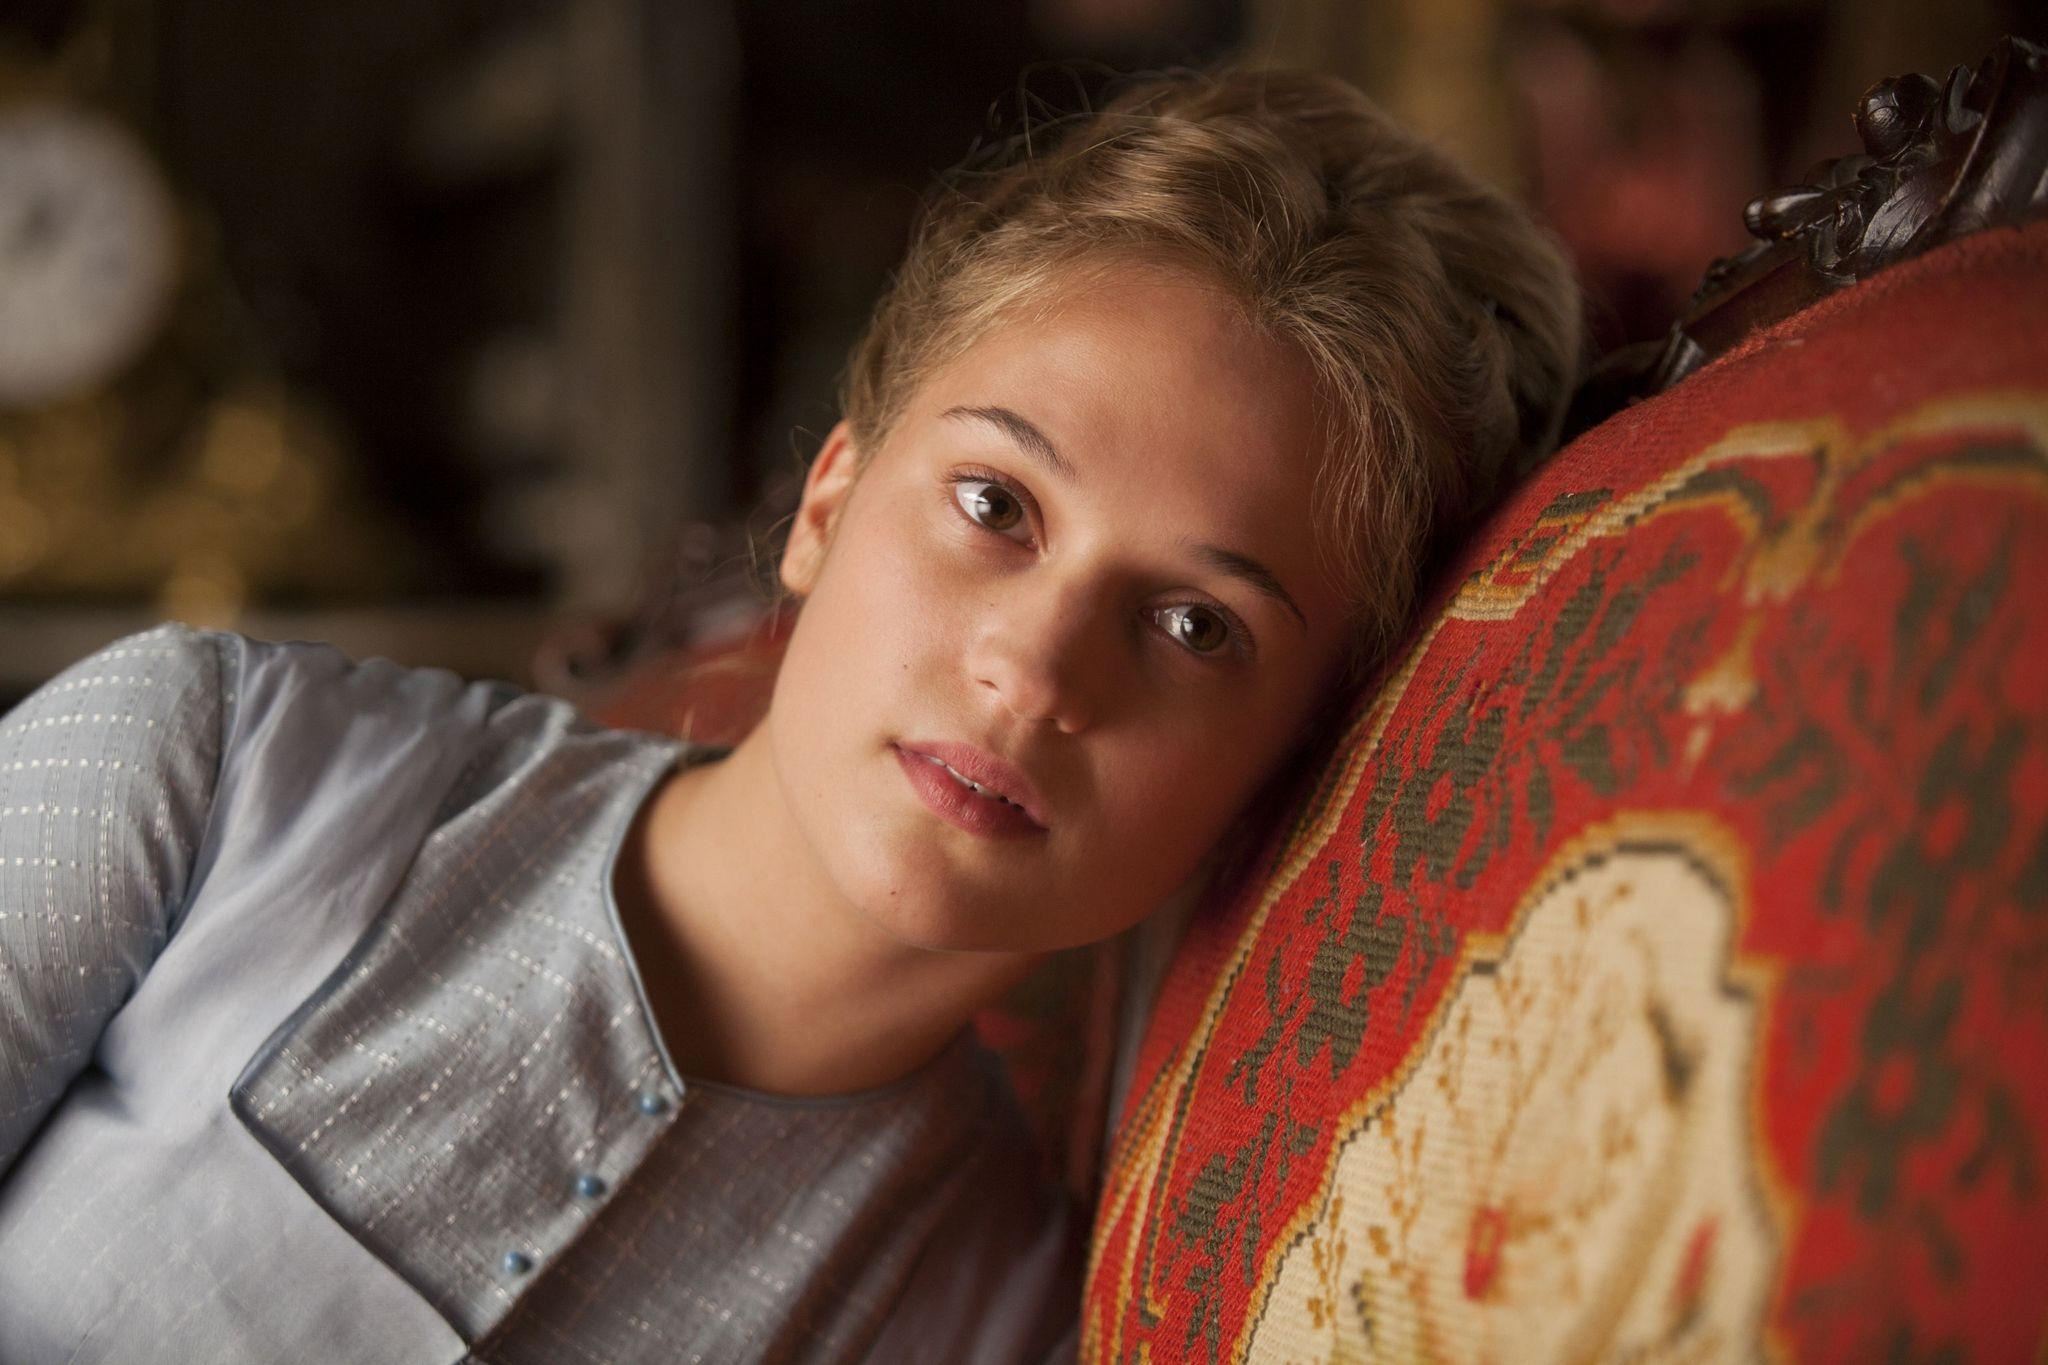 Alicia Vikander Says She Was 'Most Sad' at 'My Height of Fame': 'I Was  Always by Myself